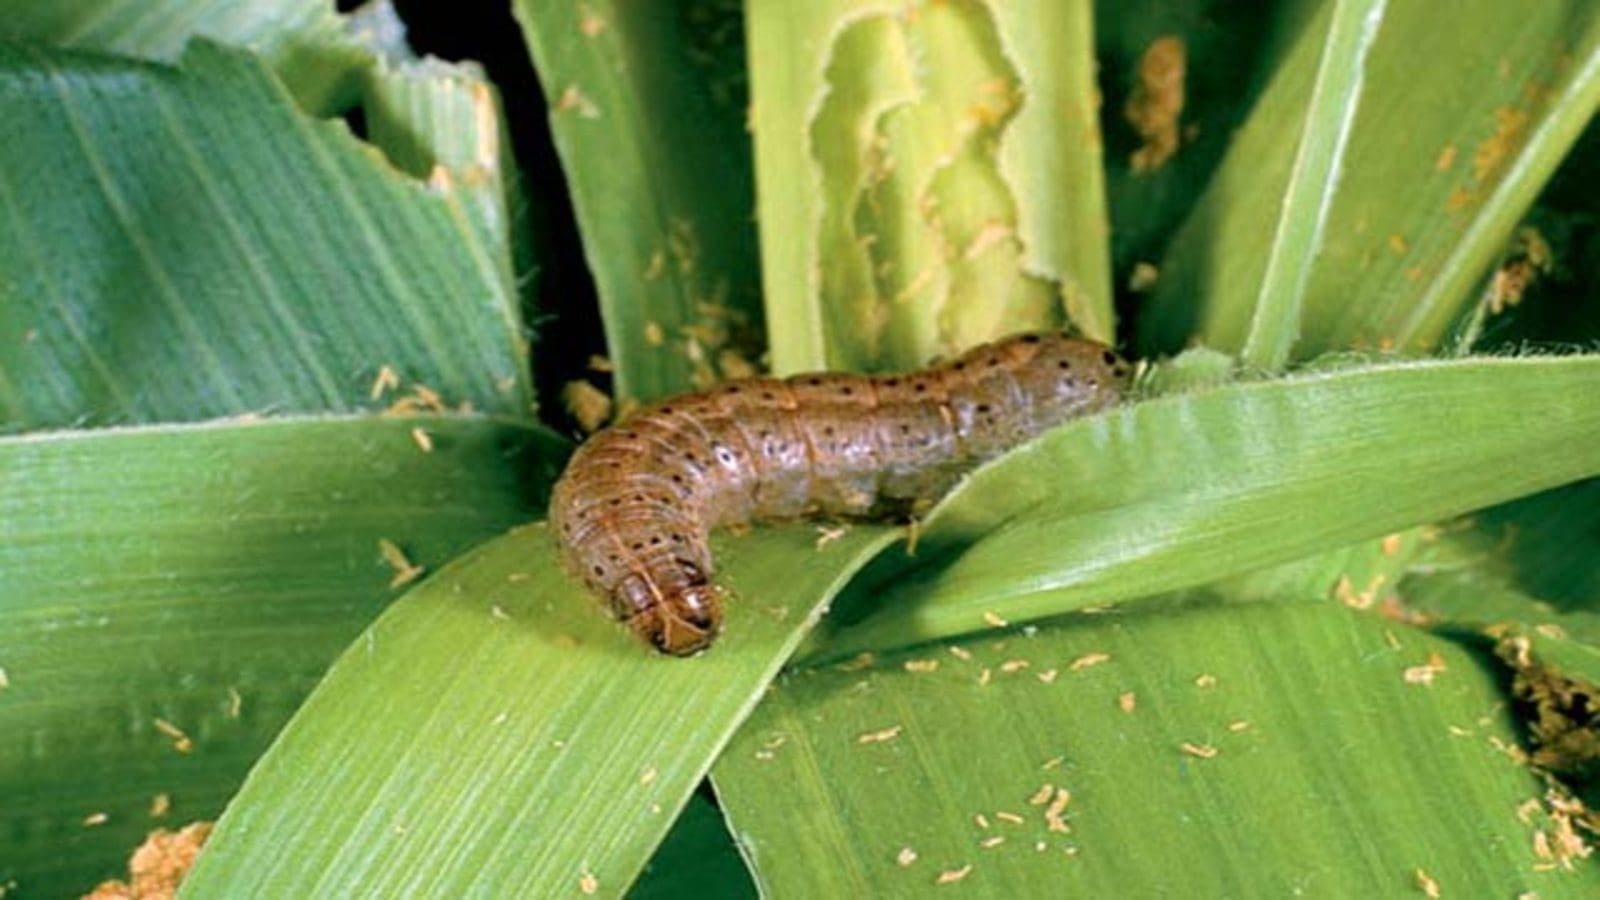 Almost all of Africa’s maize crop is at risk from devastating fall armyworm pest, study reveals